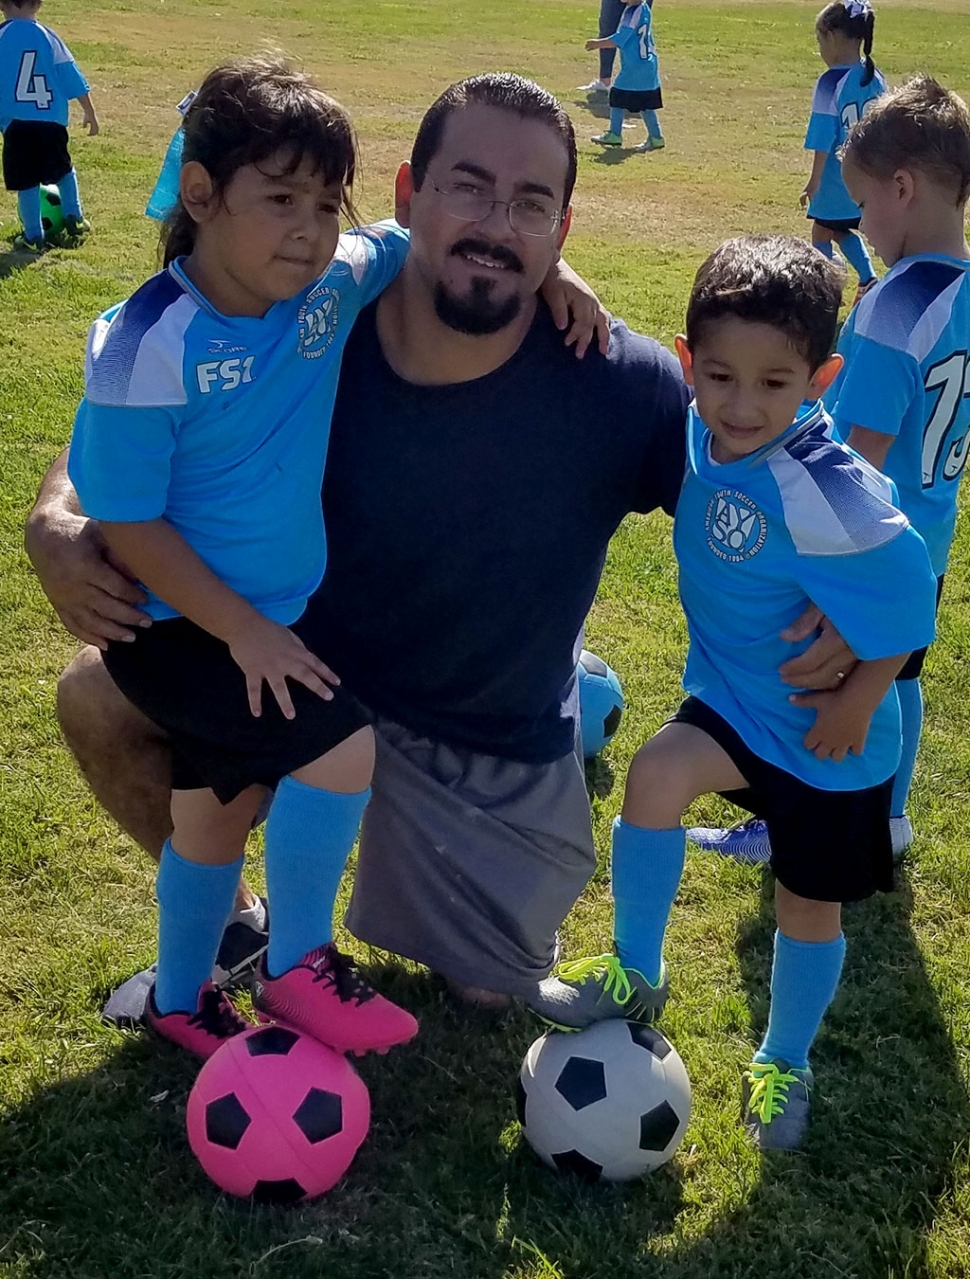 Fillmore AYSO Youth Soccer is in full swing on September 29th the held their 5th week of games at Sheills Park players and at Shiells park in Fillmore. Pictured are two players with their dad enjoying a fun weekend of competition. Photos courtesy Coach Omero.